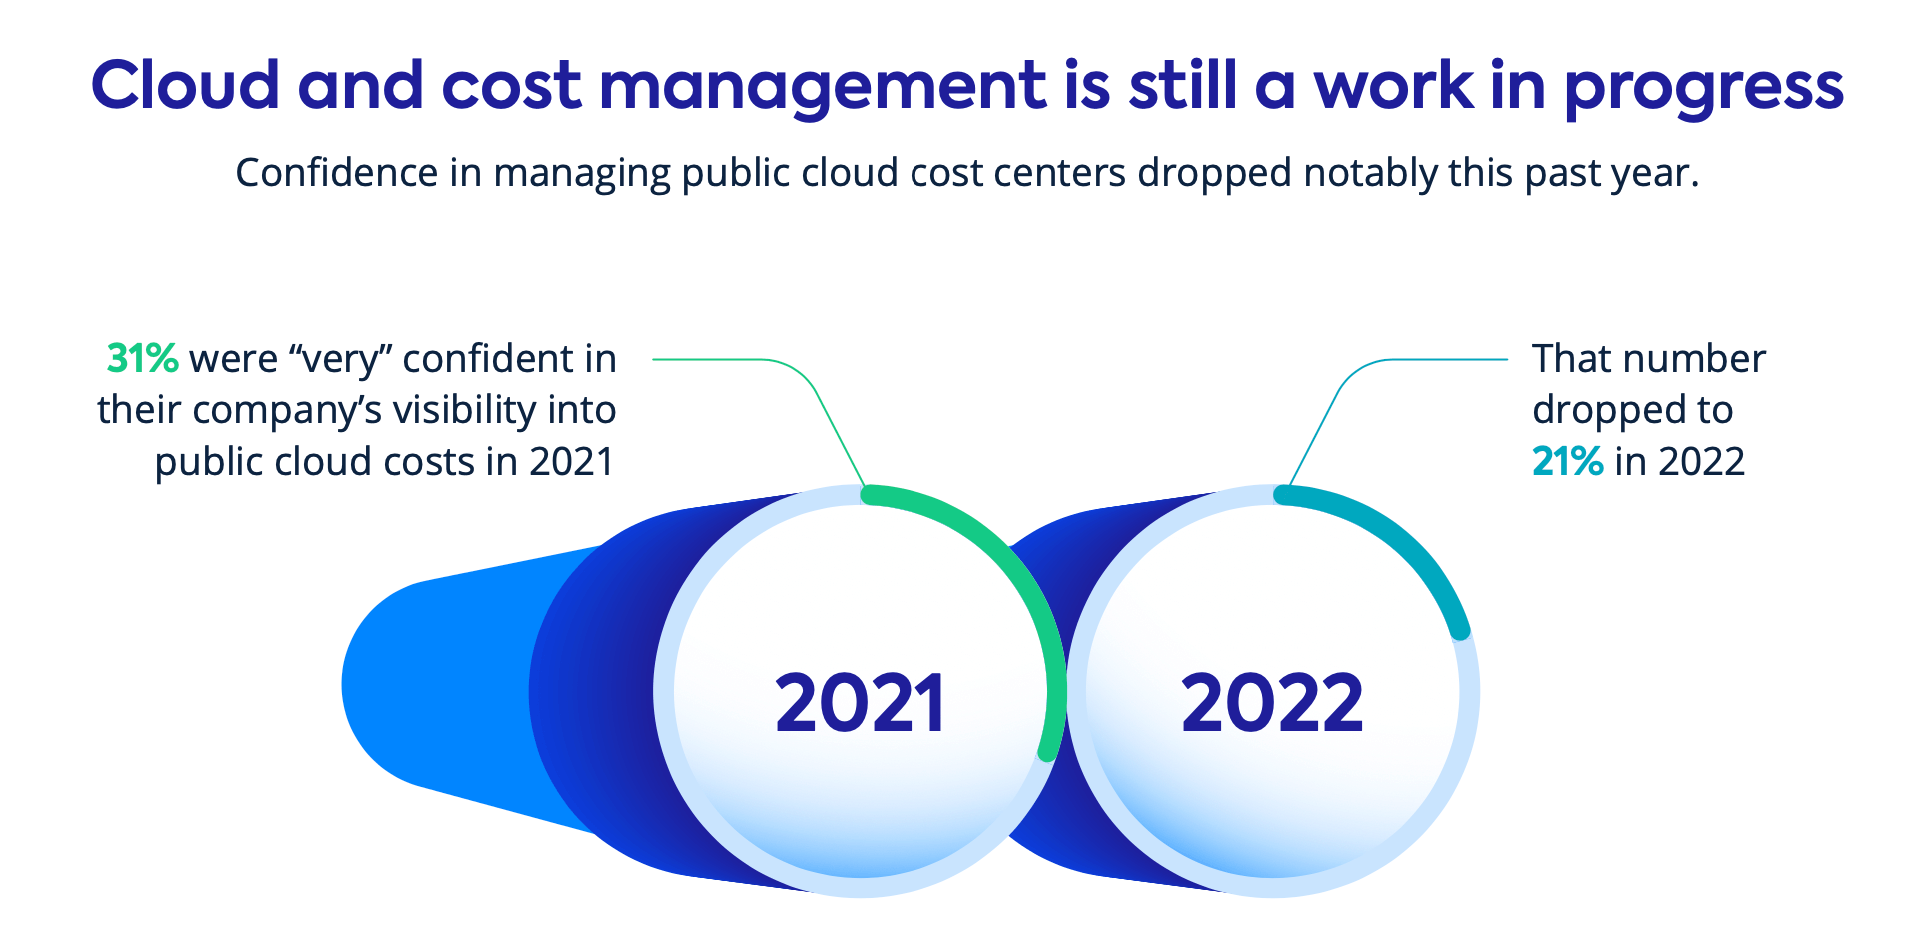 Statistic from infographic on the 2022 Cloud Infrastructure Report: just 21% of enterprises are "very confident" in controlling their cloud costs